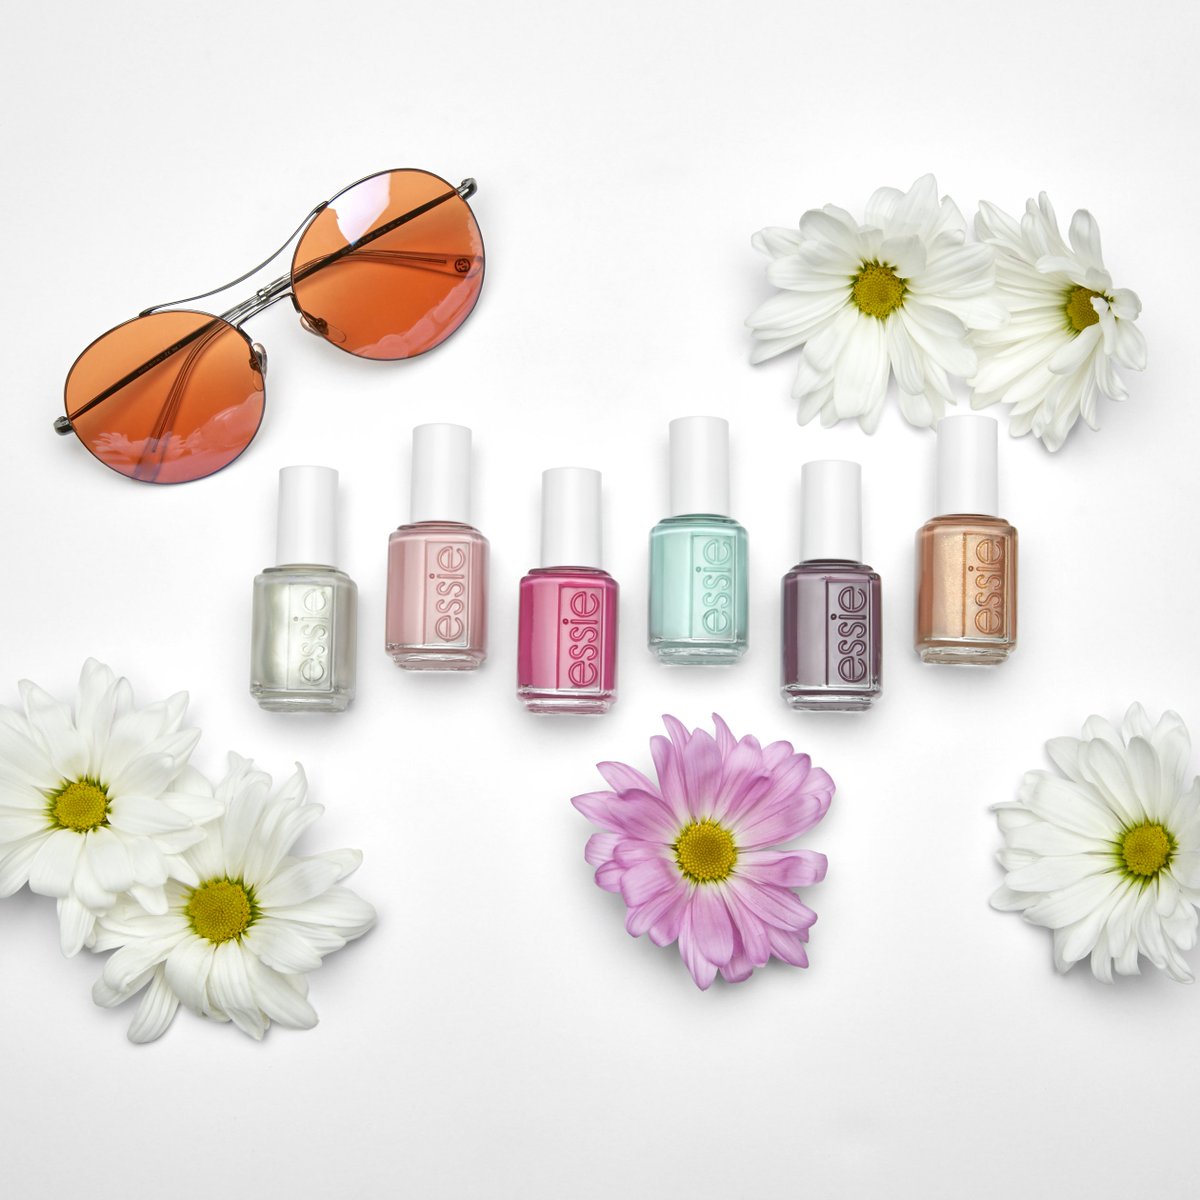 CALLING ALL OBSESSIES! Festival season is here and so is the NEW essie Summer 2018 collection!🌞💅 Which shade are you dying to try?😍 Available now in @superdrug 😎